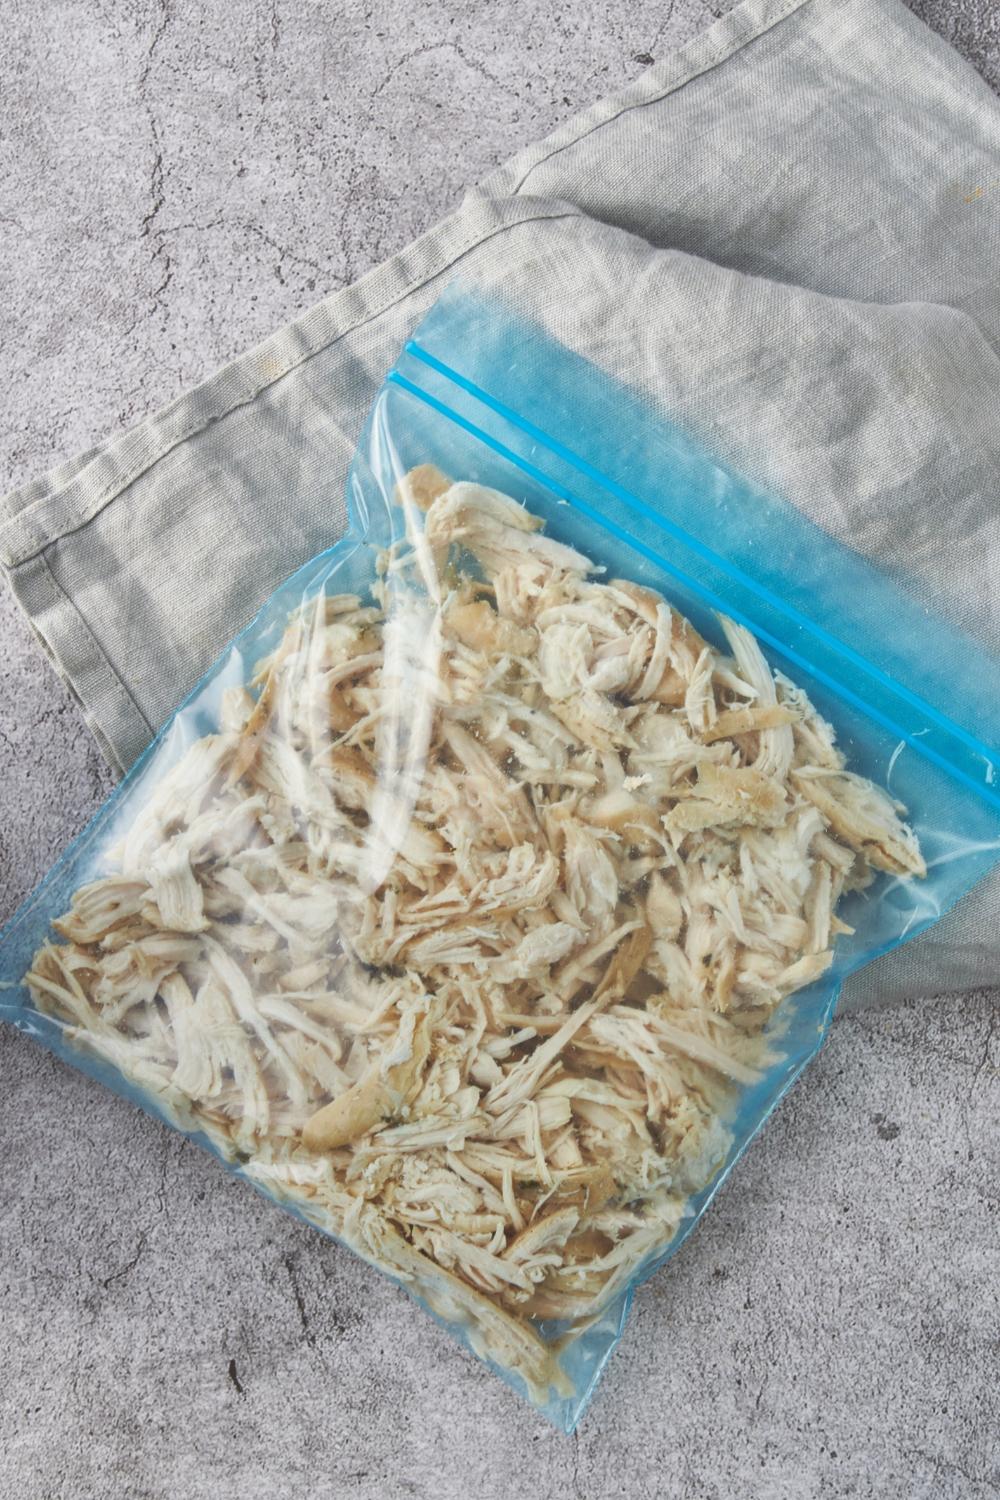 A blue resealable plastic bag filled with shredded chicken.